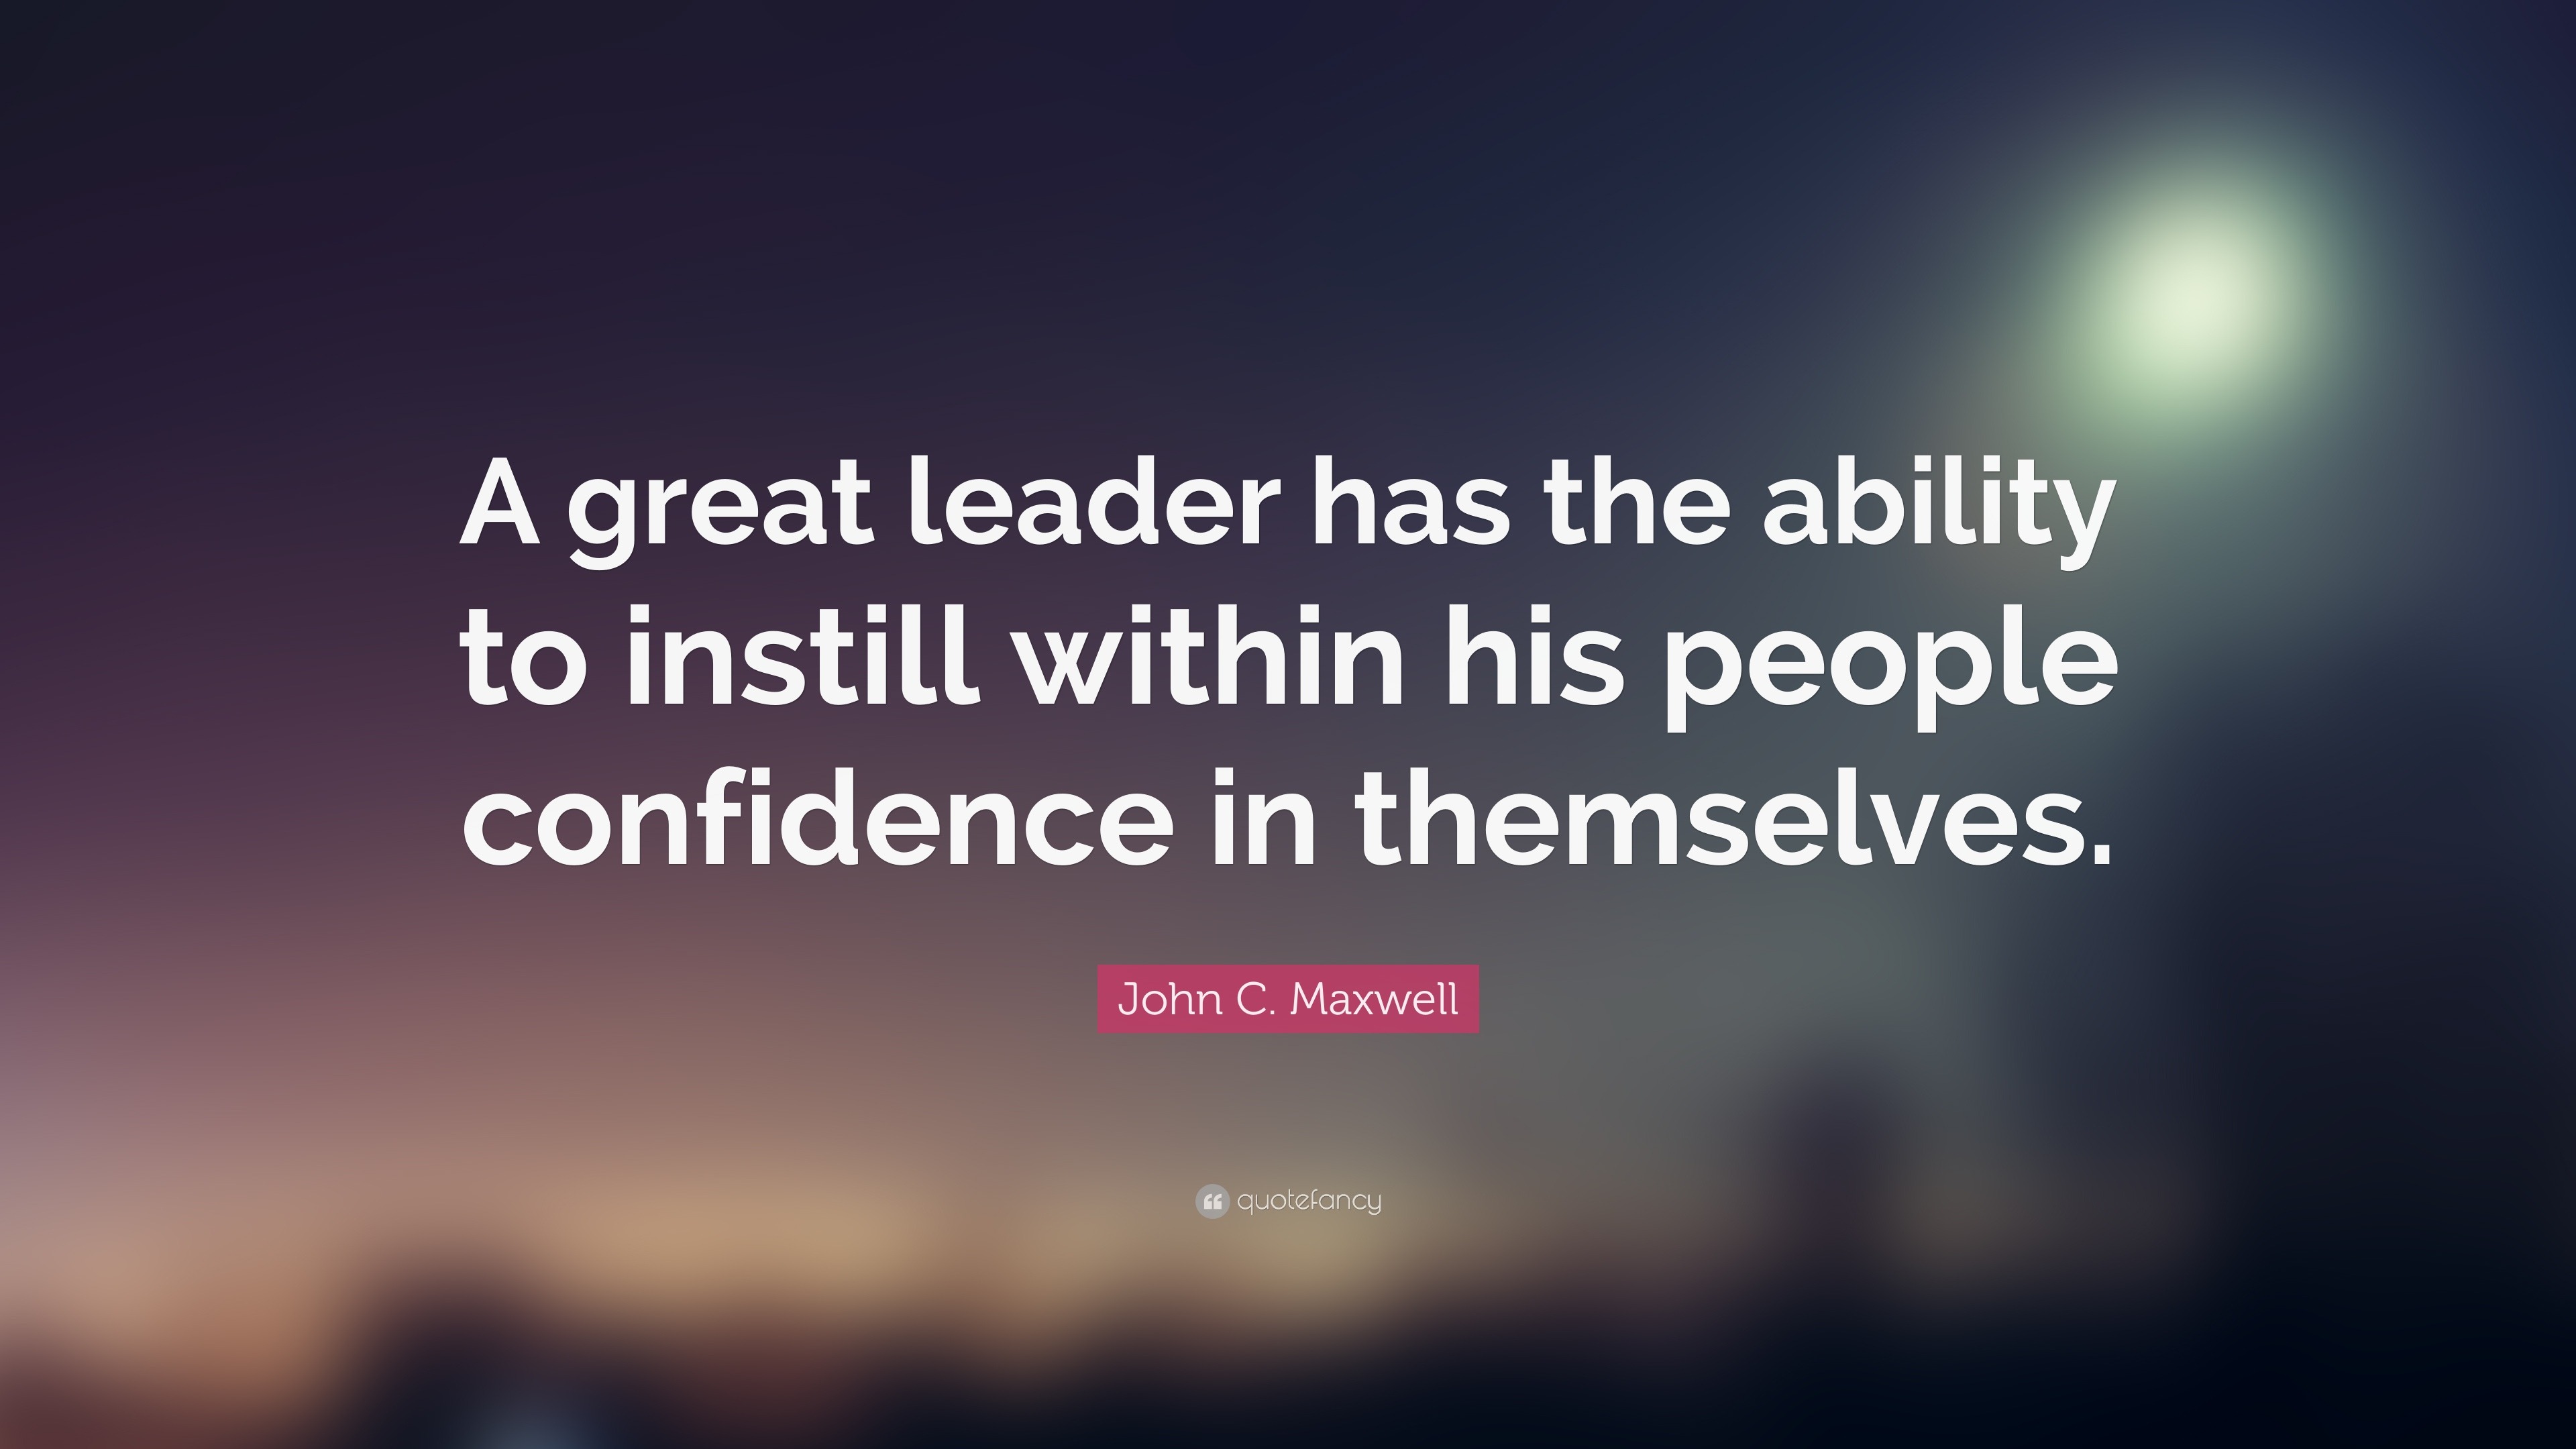 John C. Maxwell Quote: “A great leader has the ability to instill ...